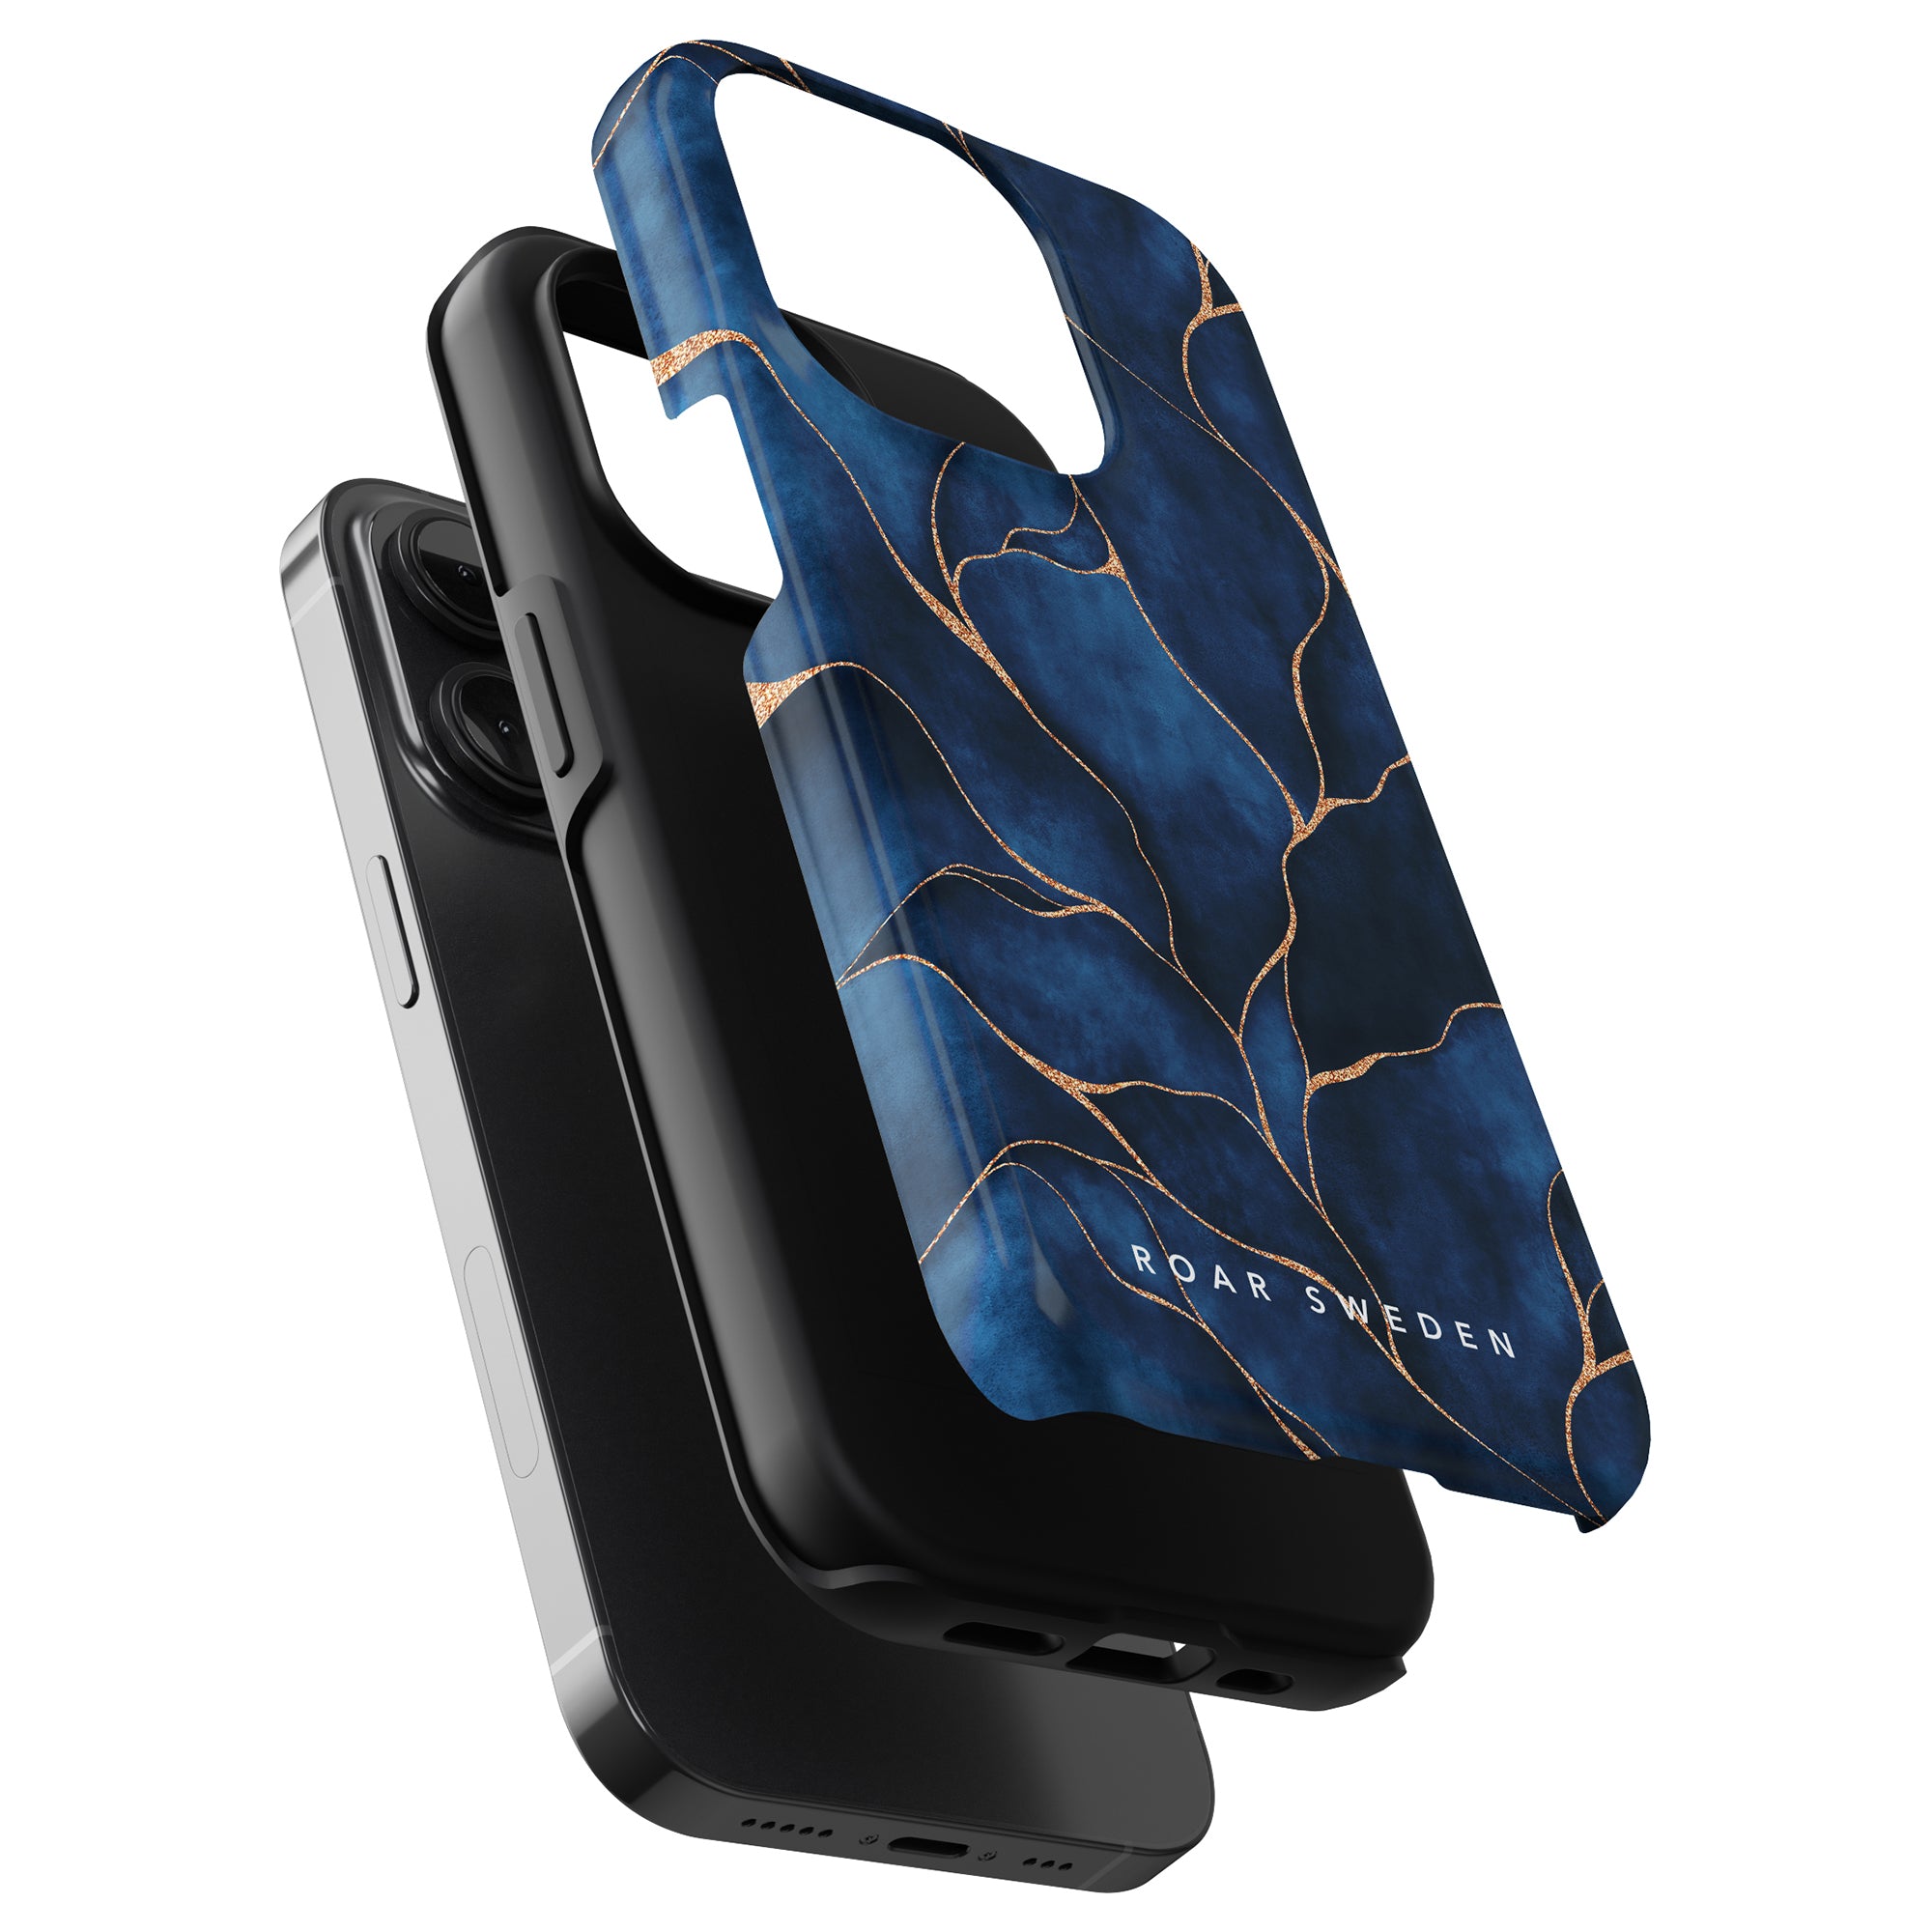 A Yggdrasil - Tough Case in a black case next to a blue and gold patterned fabric phone pouch with the text "Yggdrasil Sweden.